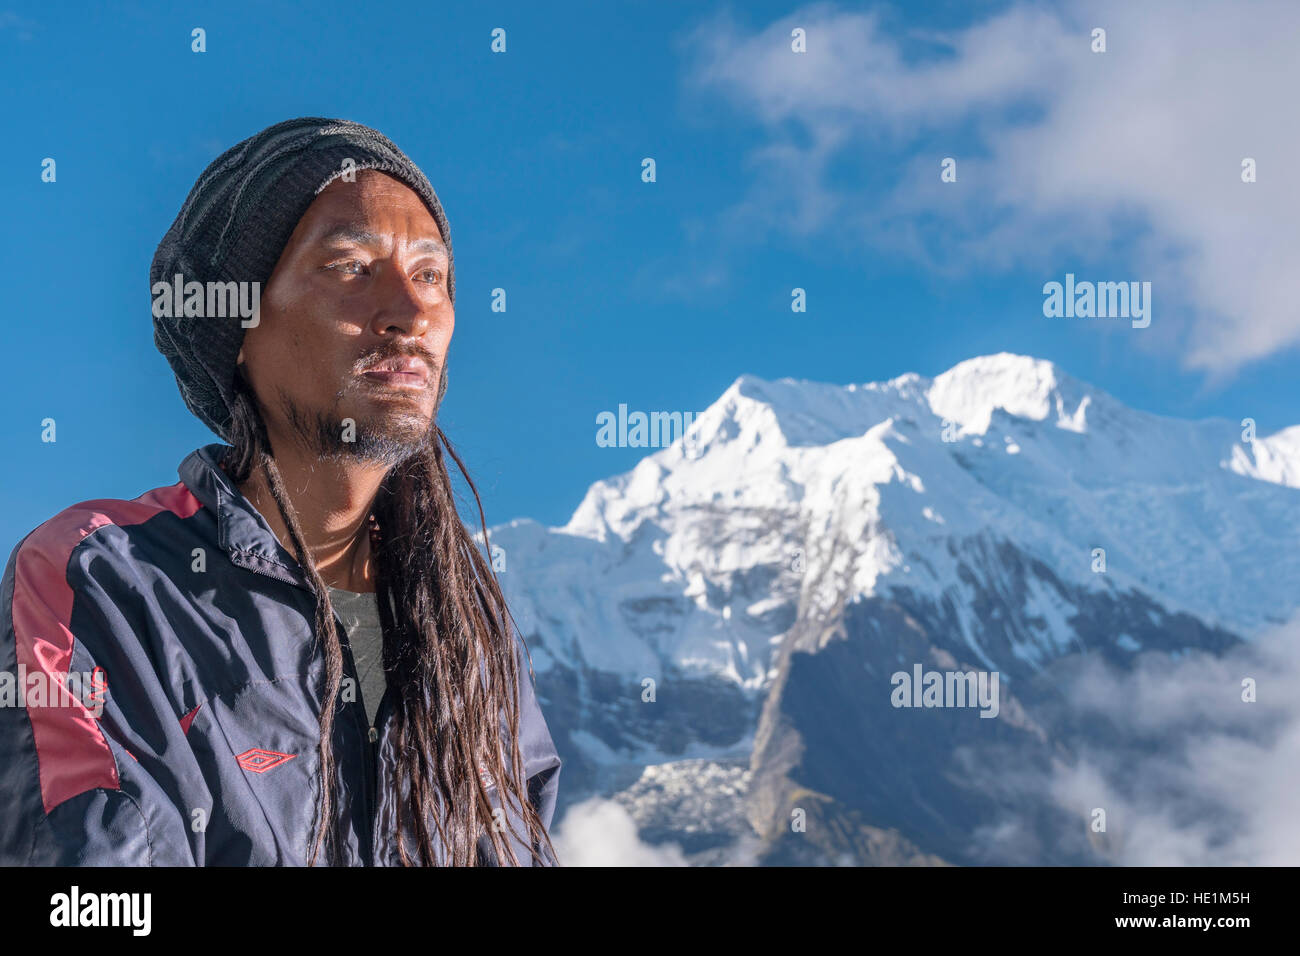 A portrait of a young man with dreadlocks, the mountain Annapurna 2 in the distance Stock Photo